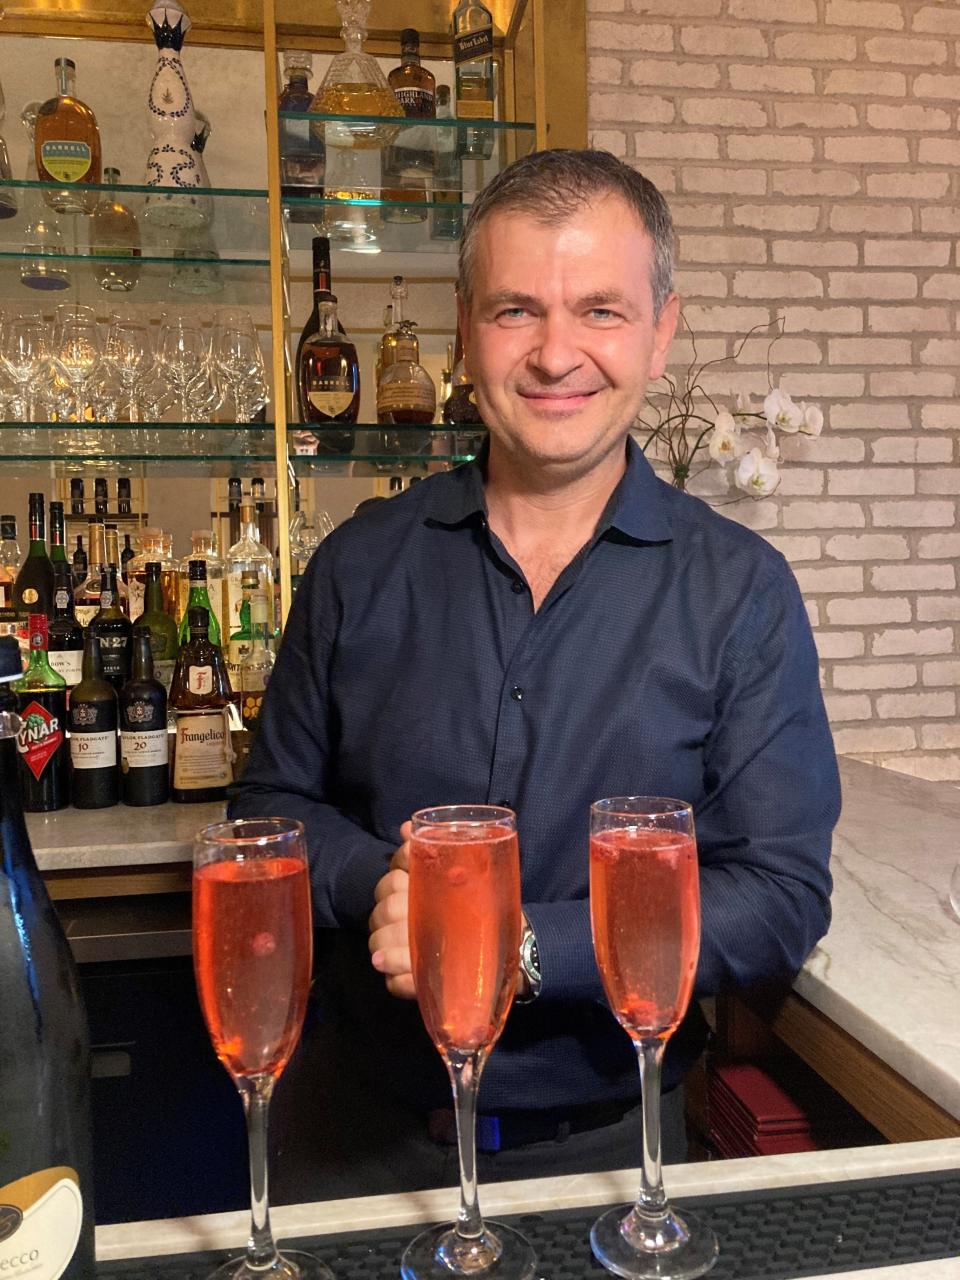 Alex Kola, co-owner of Basso56 in Chappaqua, which opened in May 2022 after years in Manhttan. Photographed August 2022